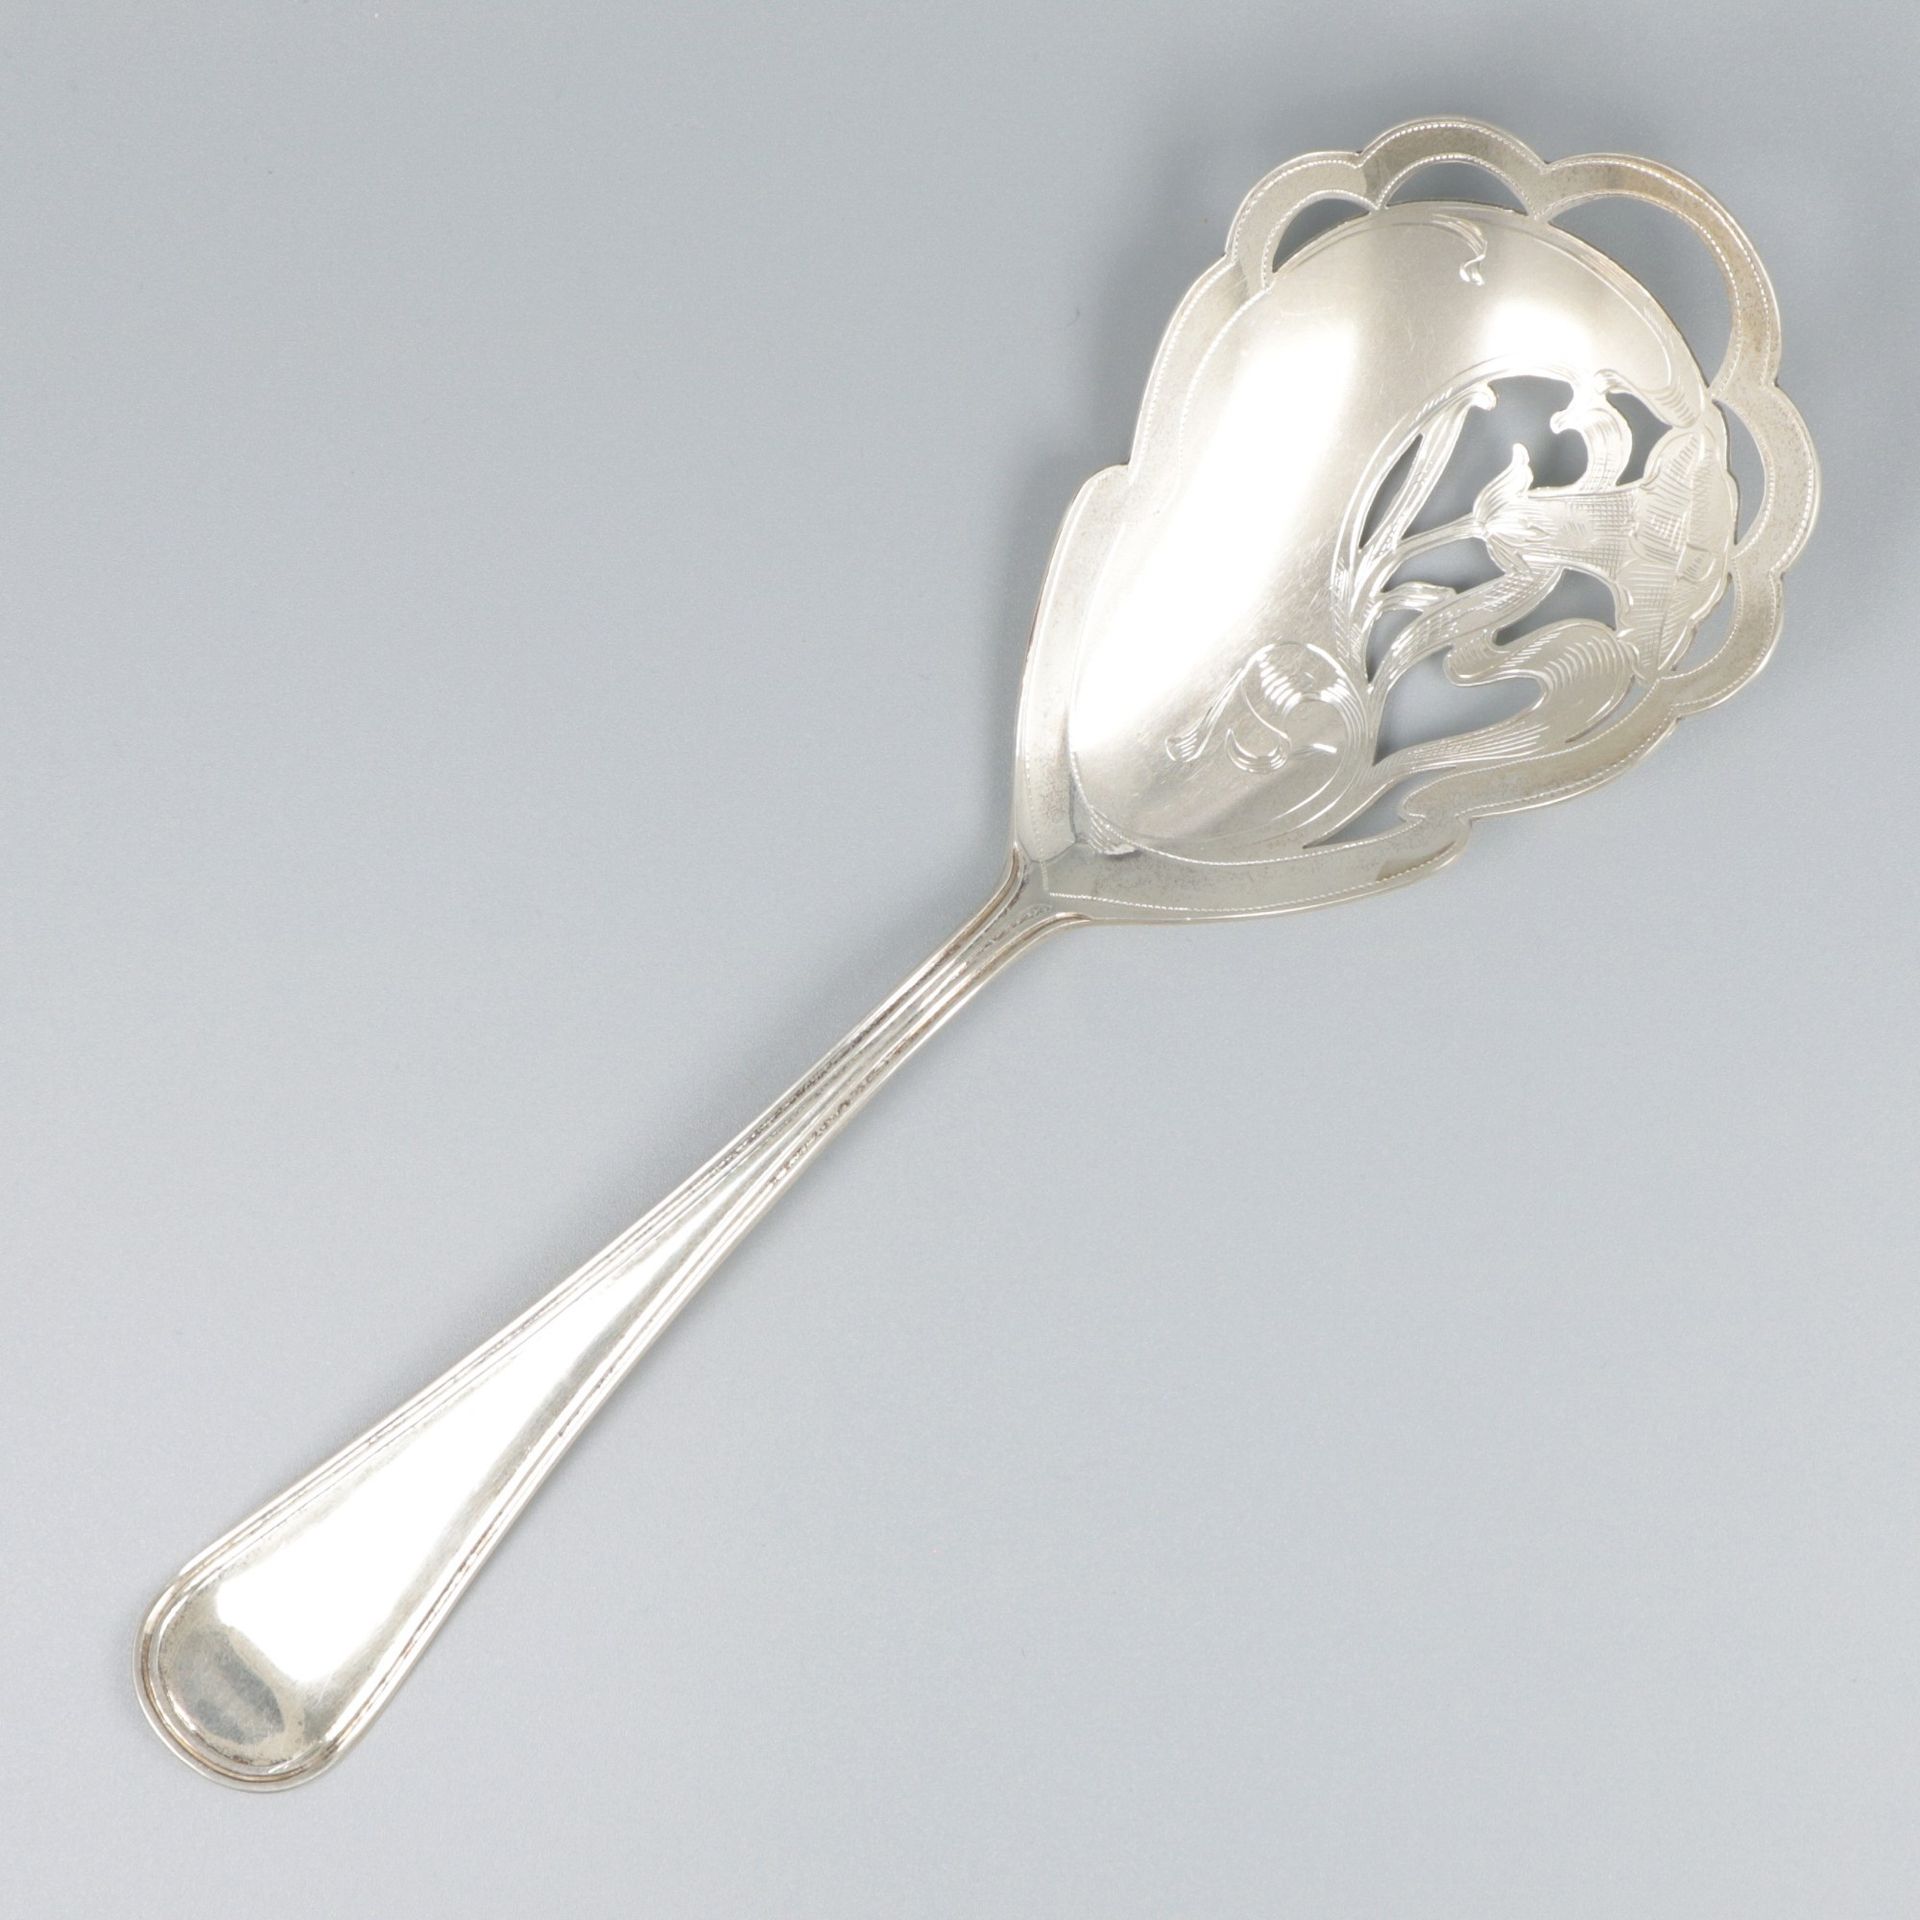 Wet fruit scoop silver. "Hollands Rondfilet" or Dutch Round Filet, with engraved&hellip;